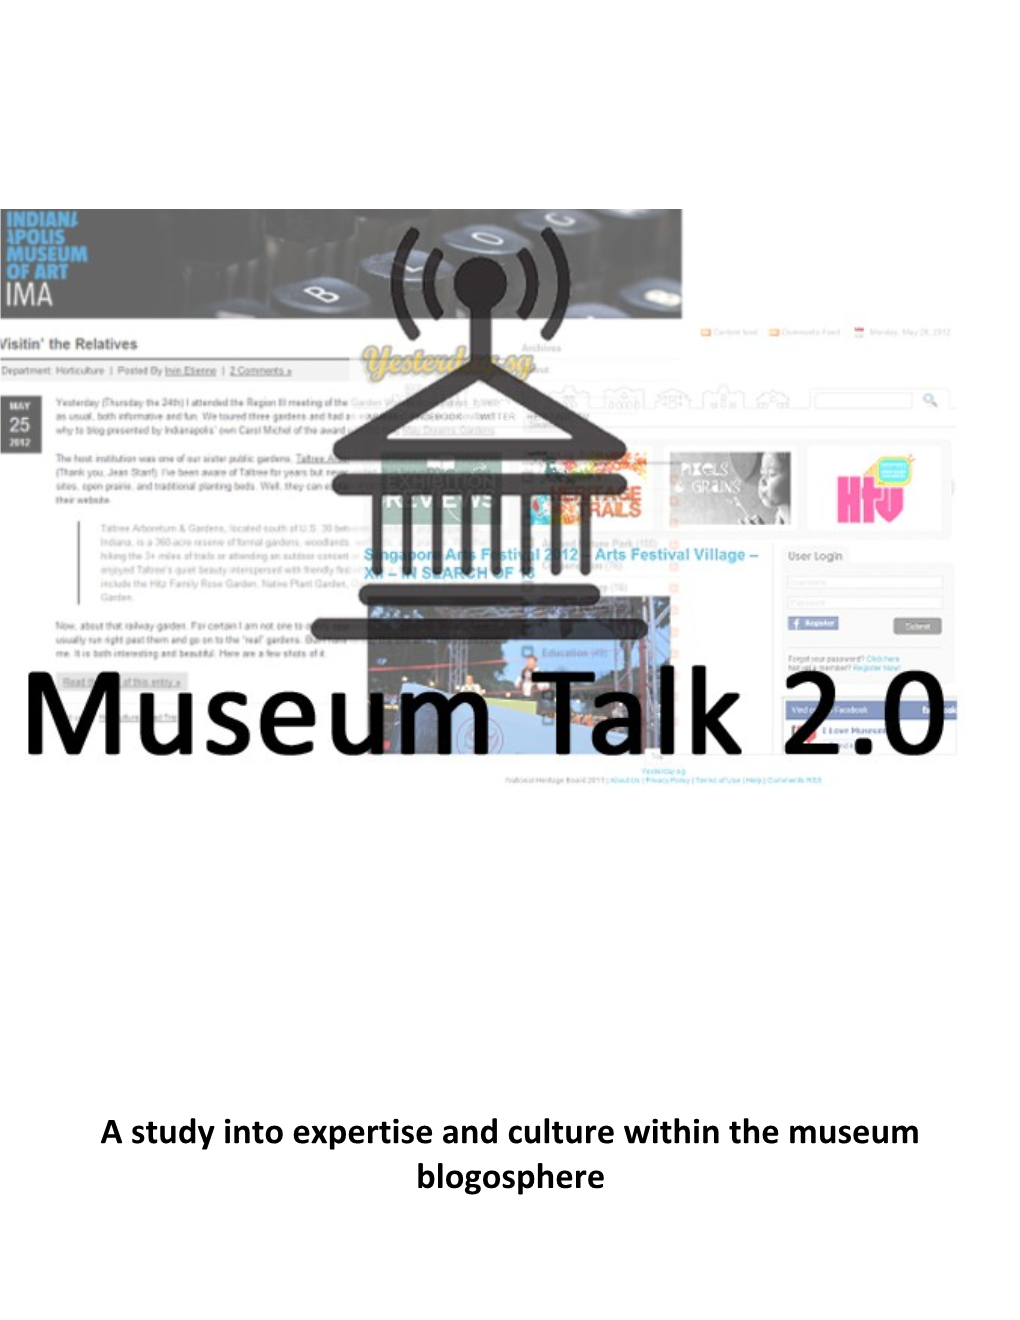 A Study Into Expertise and Culture Within the Museum Blogosphere